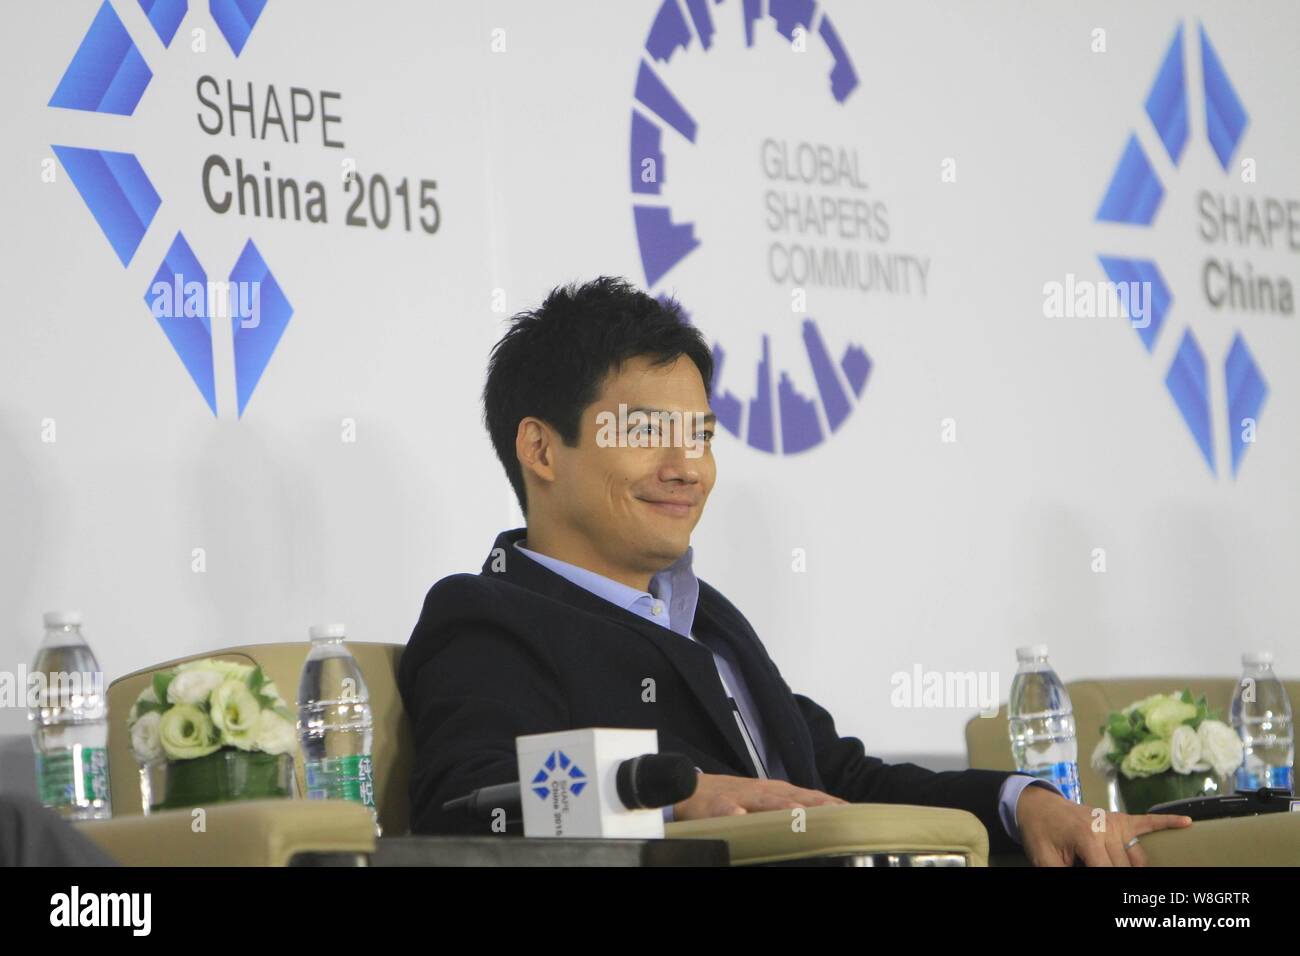 American actor Archie Kao smiles during the 1st "SHAPE China 2015" summit ahead of the "Summer Davos" Forum in Dalian city, northeast China's Liaoning Stock Photo